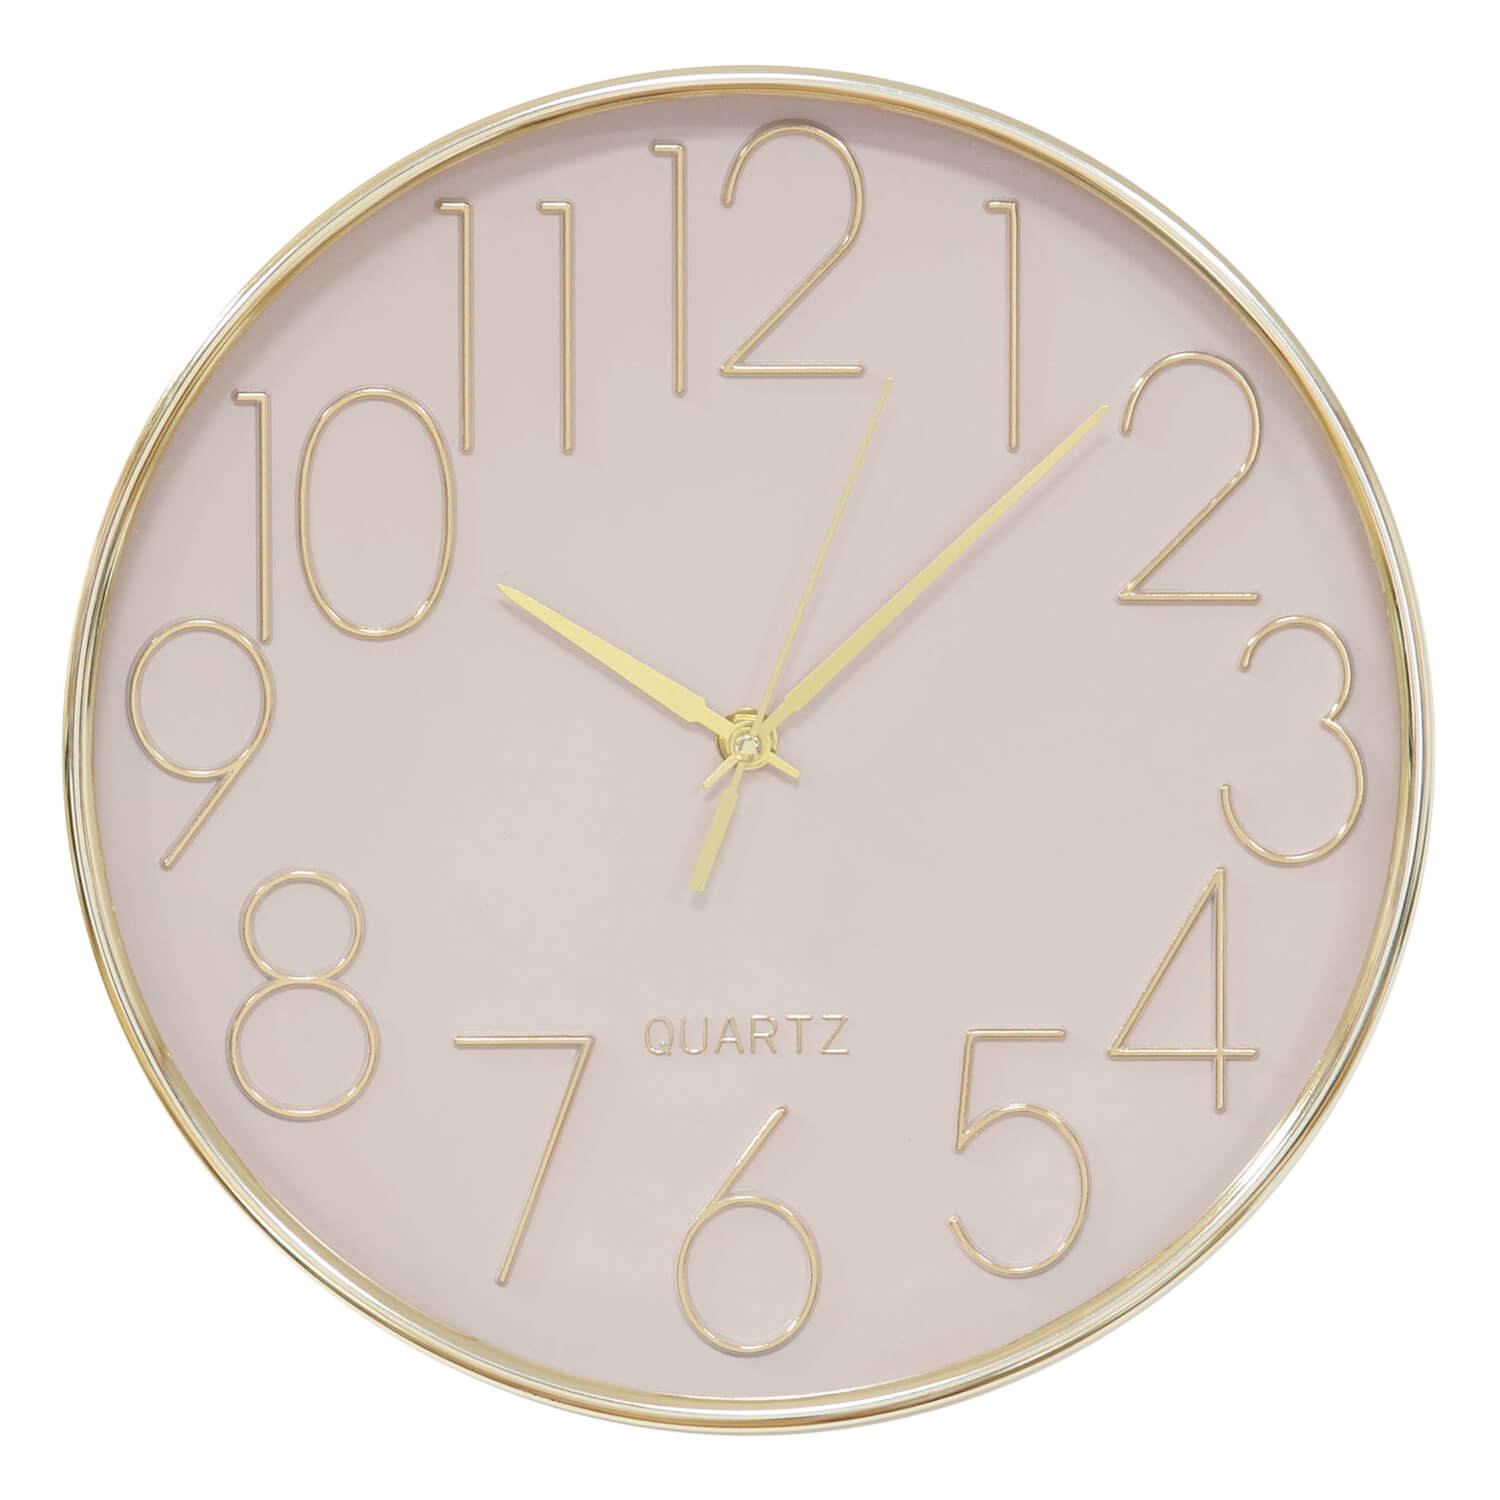 Hometime Wall Clock 30cm - Gold &amp; Blush 1 Shaws Department Stores